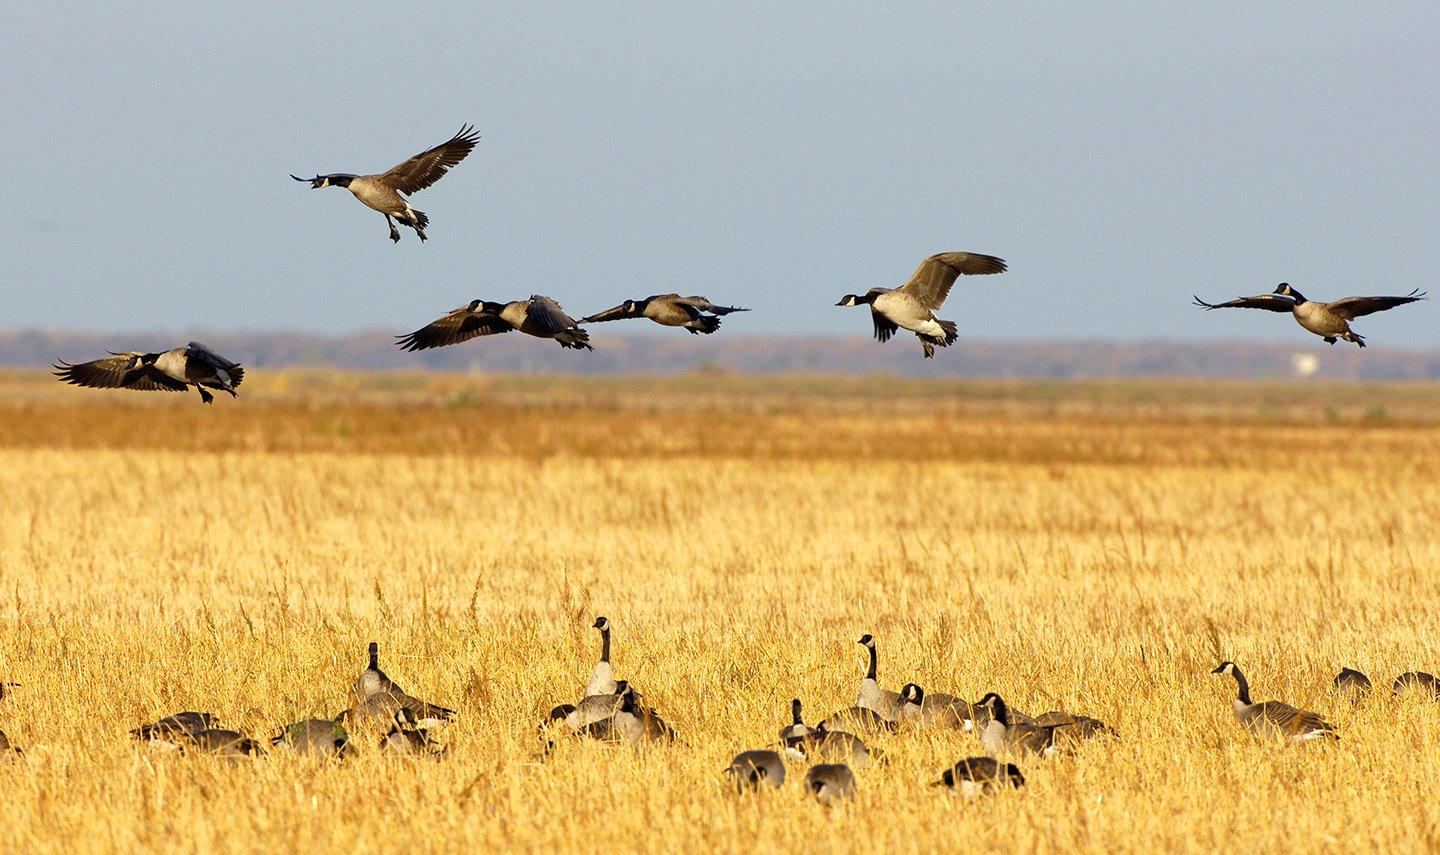 Geese won't land there. Or will they? Never make assumptions with wild birds. Photo © Images on the Wildside